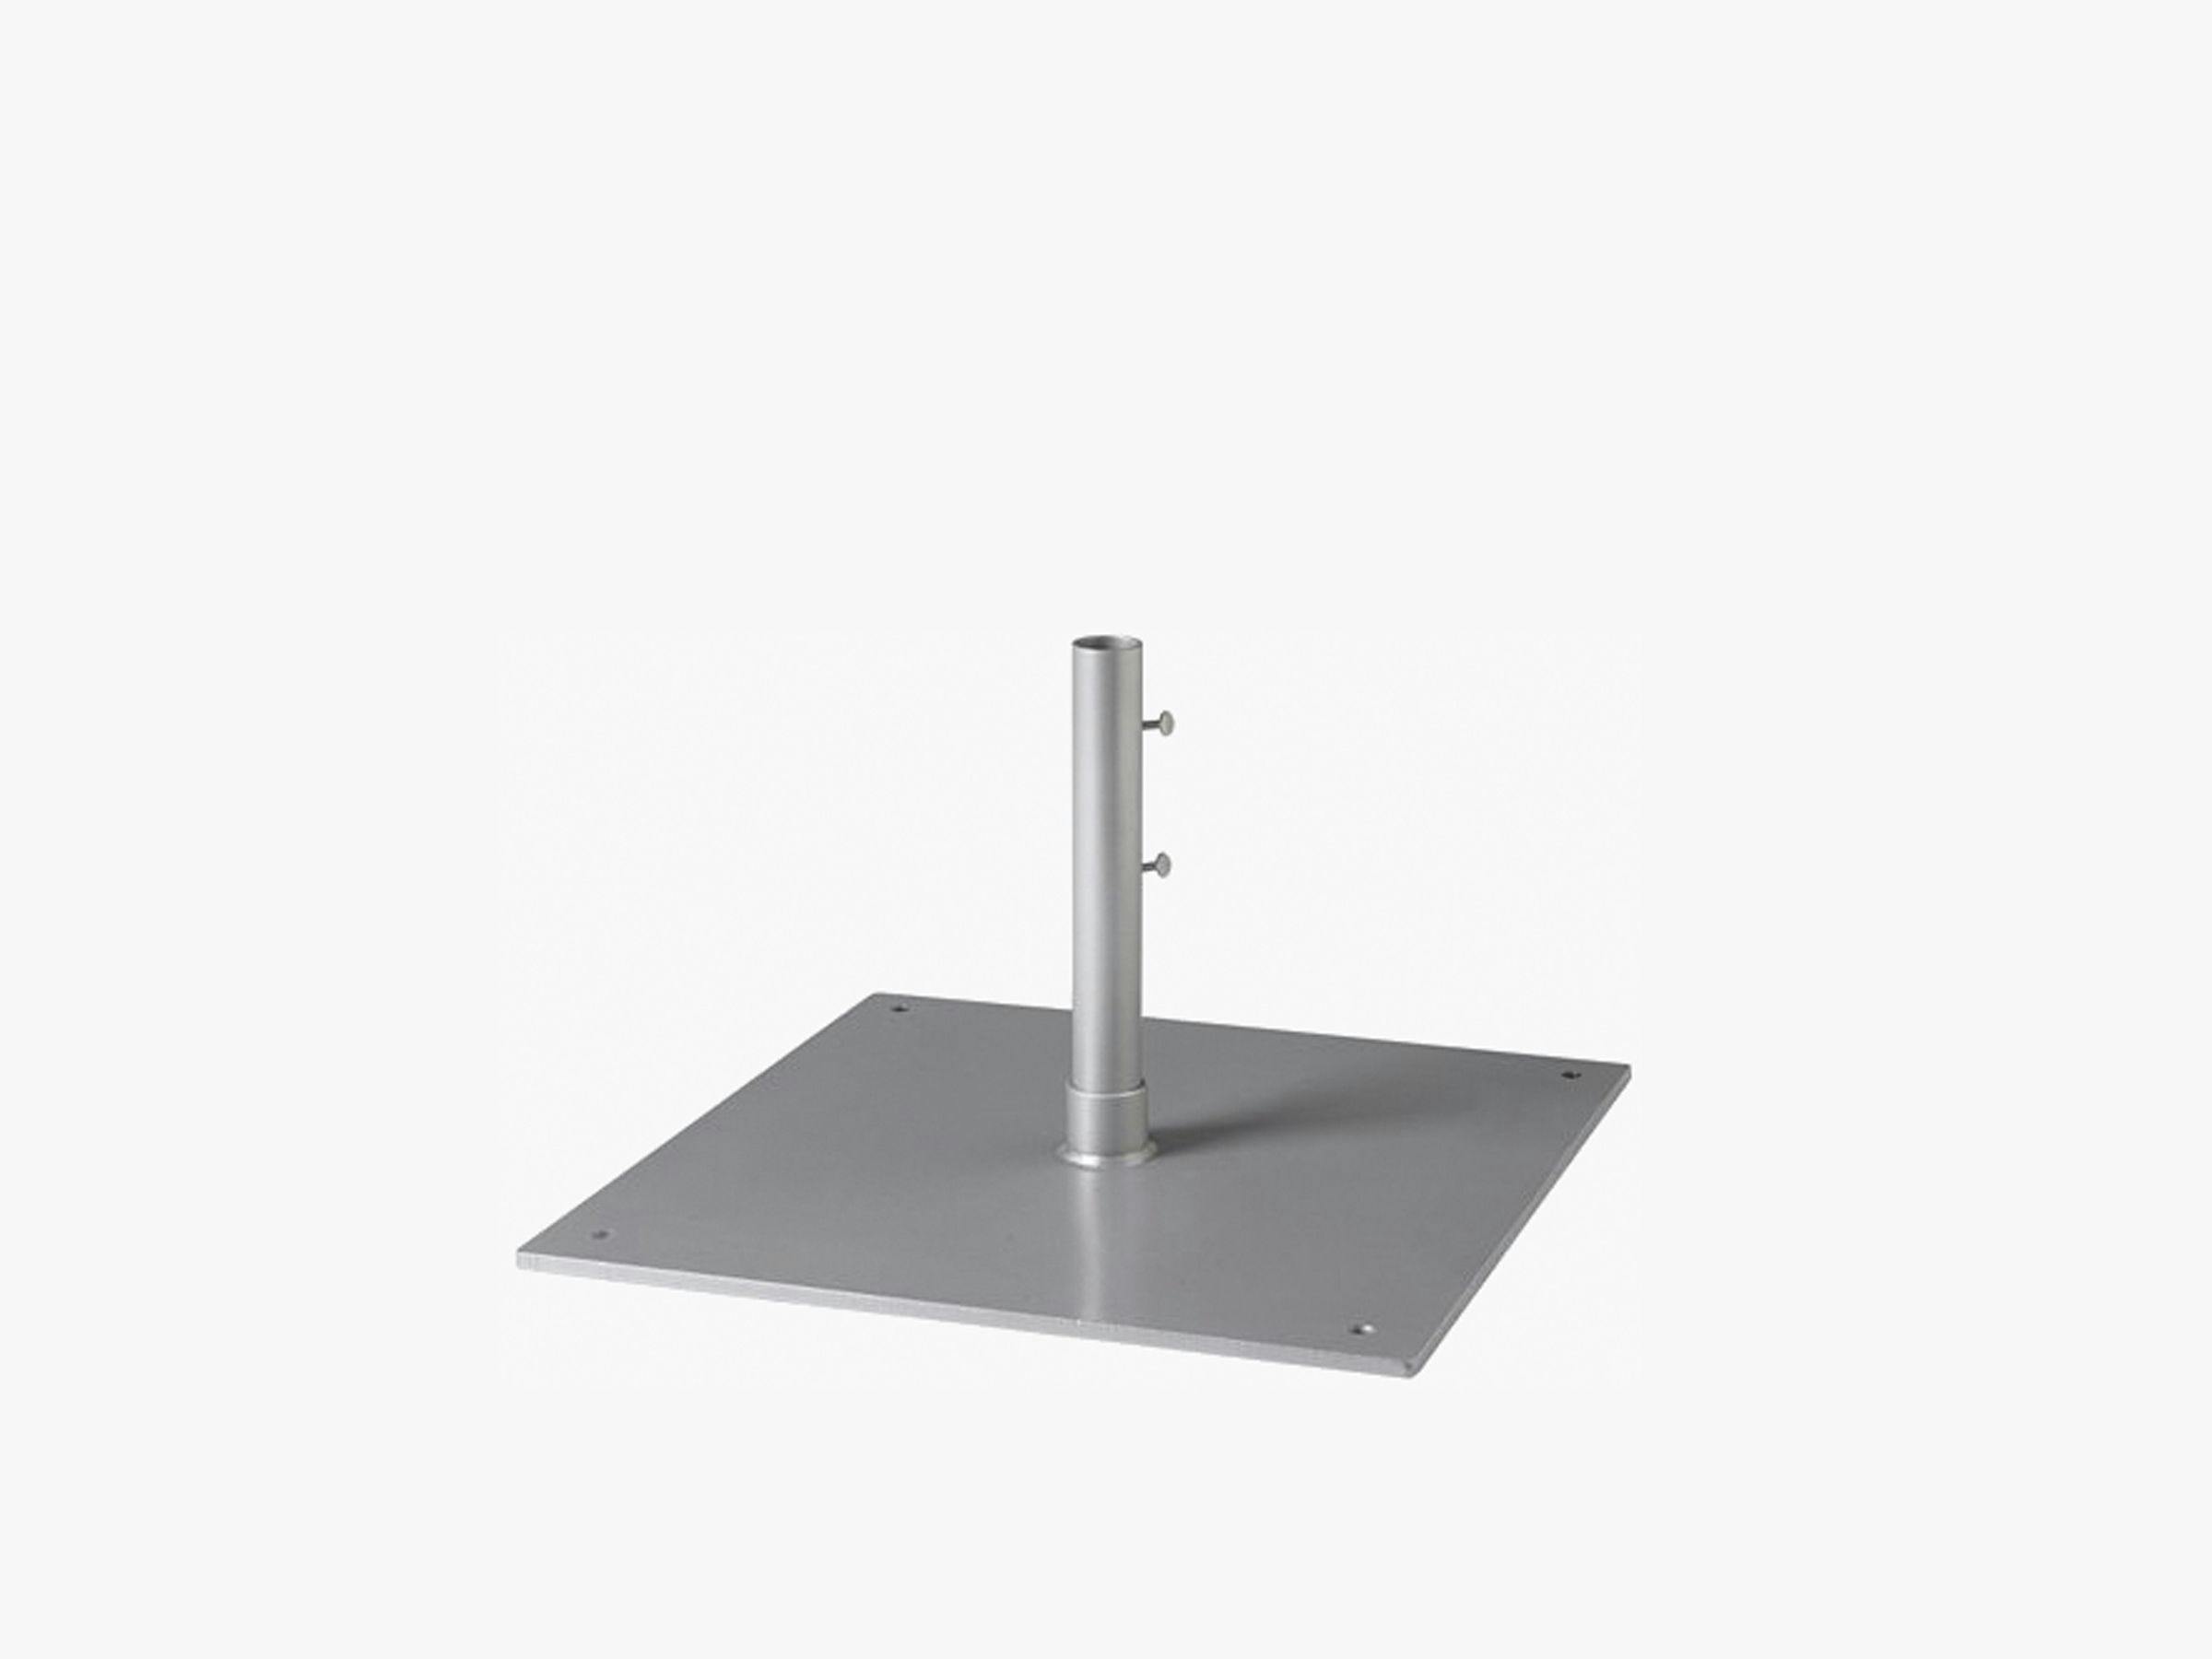 Steel Plate Base, 24" Square, 1.5" Pole, Free Standing